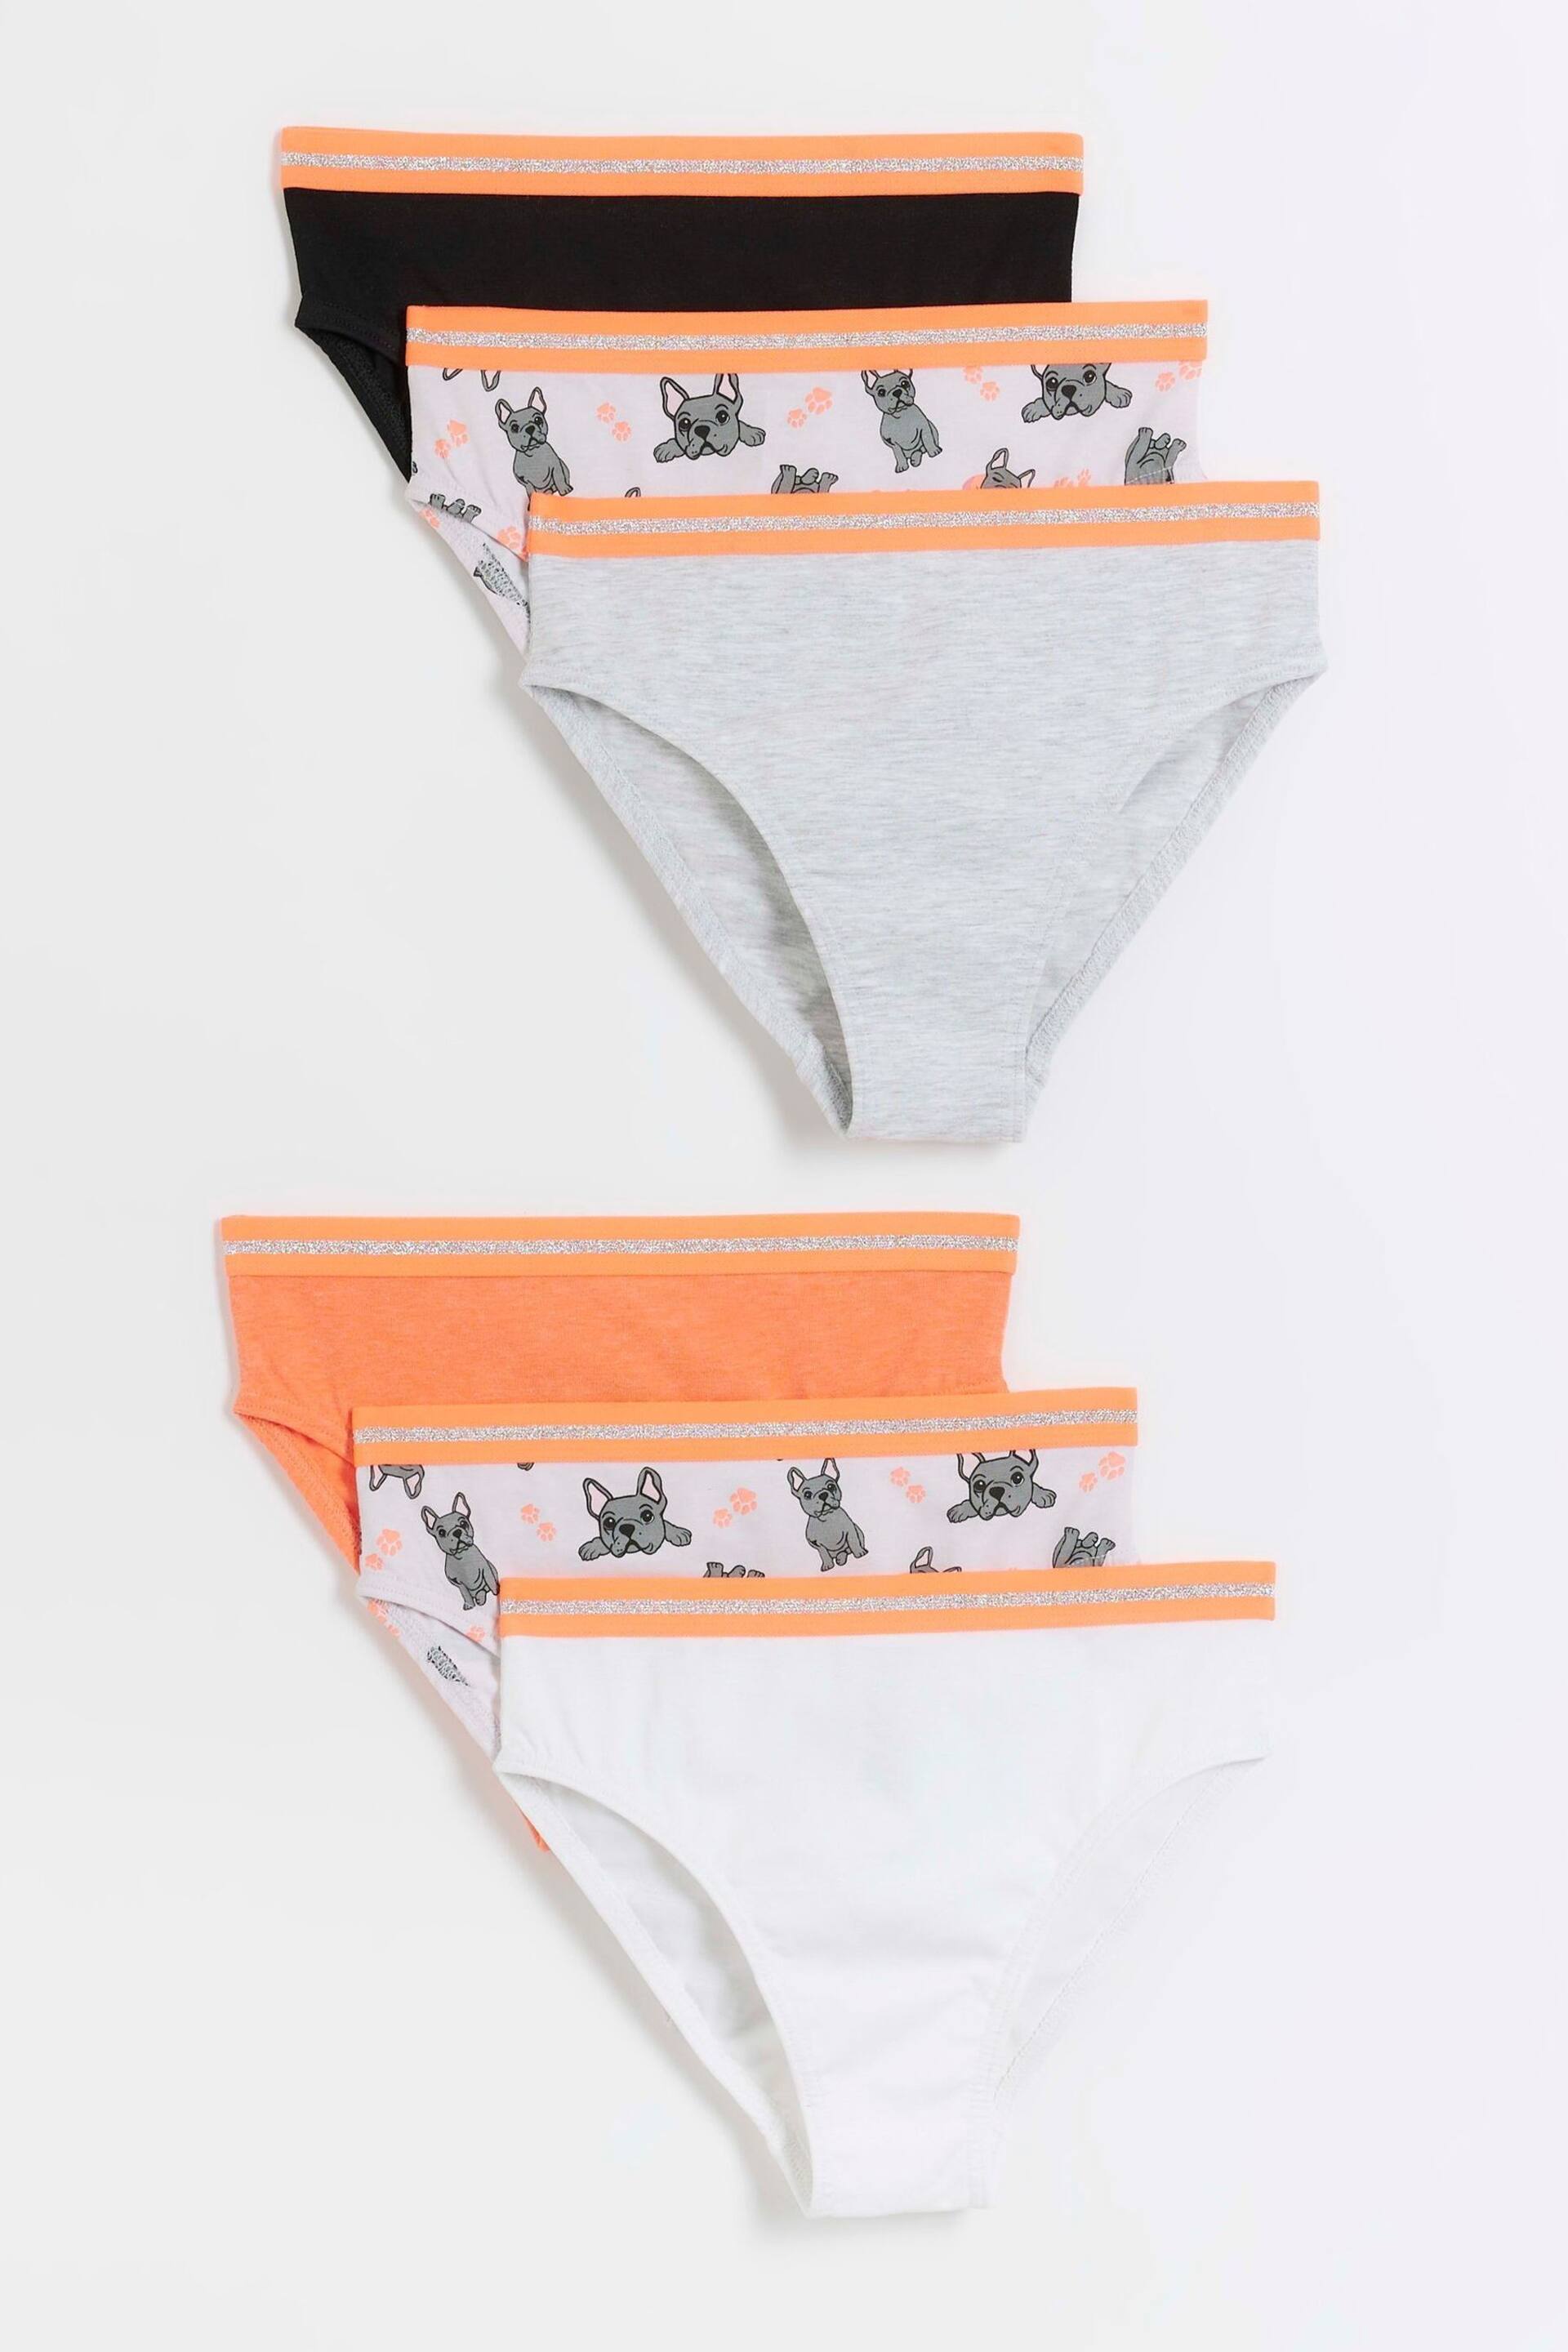 River Island Pink Girls Multipack of 6 Frenchie Briefs - Image 1 of 3